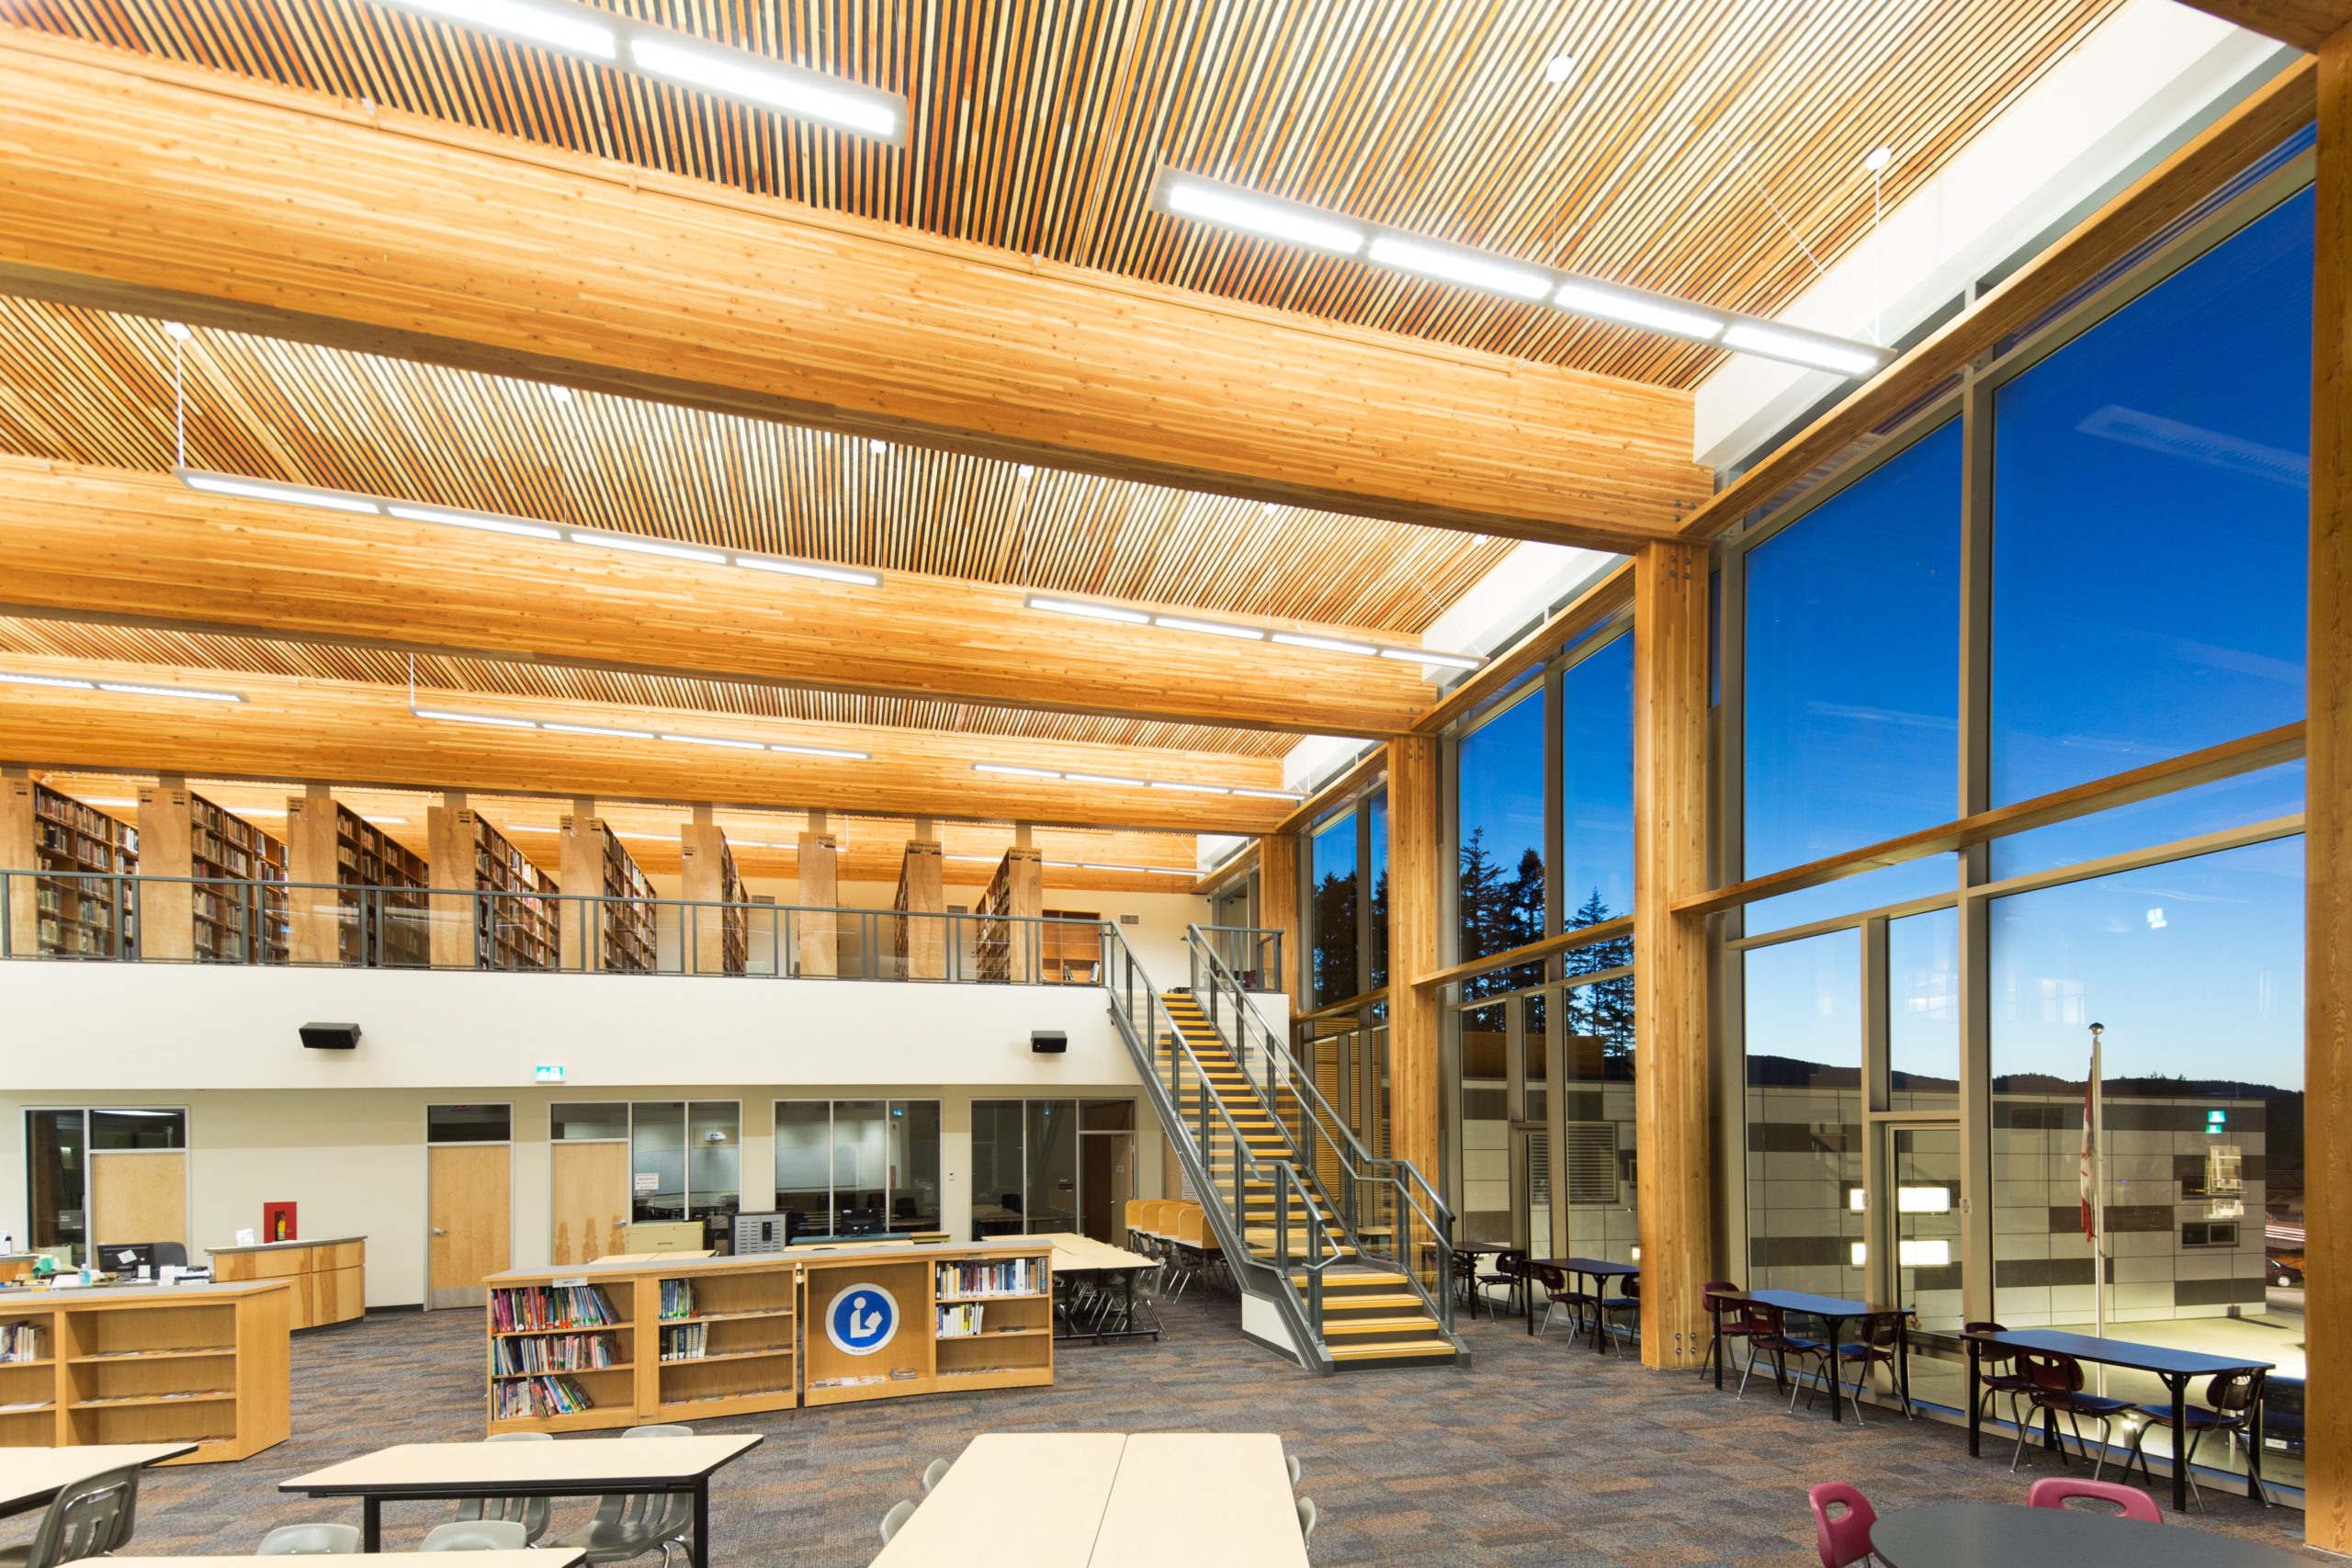 Wood book cases, desktops, staircase and hybrid ceiling construction feature prominently in this interior view of the Belmont Secondary School library.